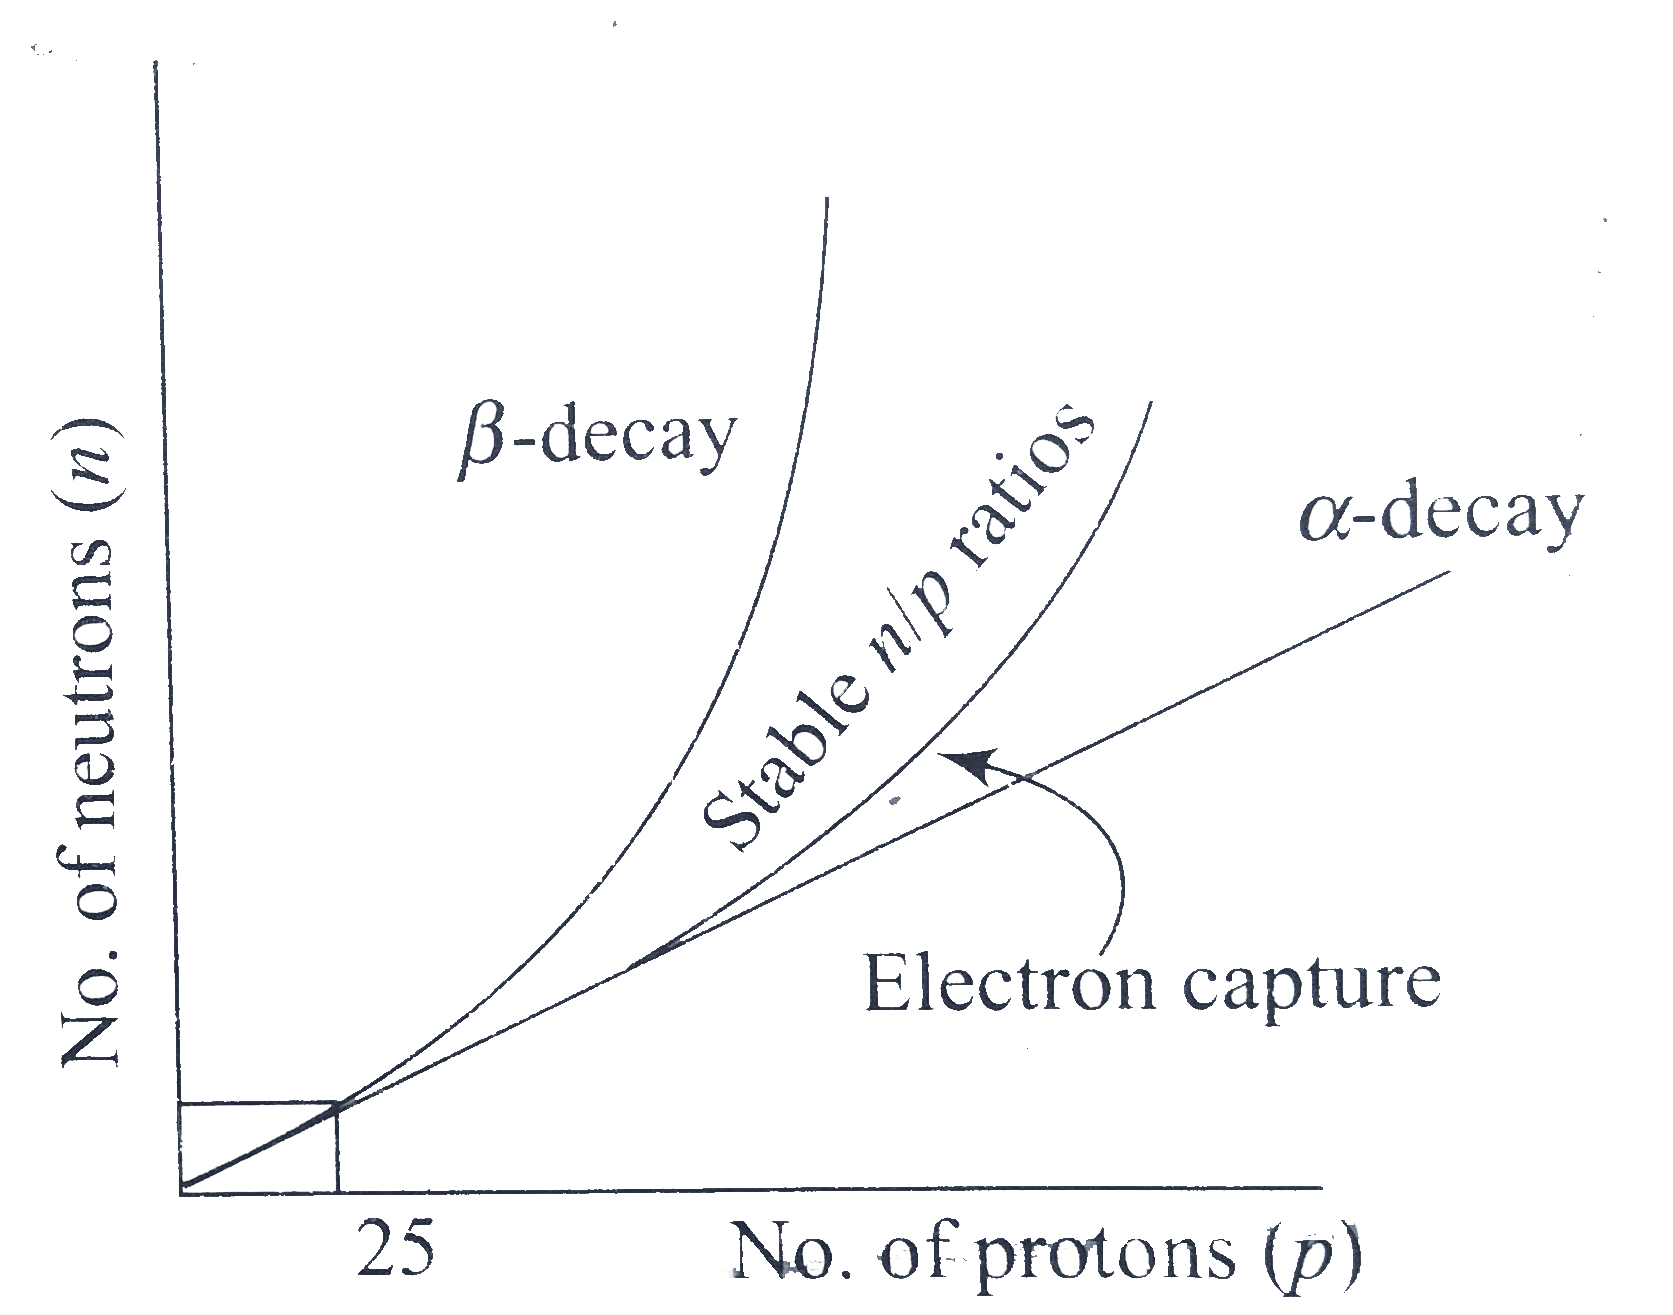 Various rules of thumb have seen proposed by the scientific community to expalin the mode of radioactive decay by various radioisotopes. One of the major rules is called the n//p ratio. If all the known isotopes of the elemnts are plotted on a graph of number of neutrons (n) versus number of protons (p), it is observed that all isotopes lying outside of a ''stable'' n//p ratio region are radioactive as shown f The graph exhibits straight line behaviour with unit slope up to p=25. Above p=25, tgose isotopes with n//p ratios lying above the stable region usually undergo beta decay. Very heavy isotopes (pgt83) are unstable because of their relativley large nuclei and they undergo alpha decay. Gamma ray emission does not involve the release of a particle. It represnts a change in an atom from a higher energy level to a lower energy level.      Th-230 undergoes a series of radioactive decay processes resulting in Bi-214 being the final product. What was the sequence of the processes that occured?